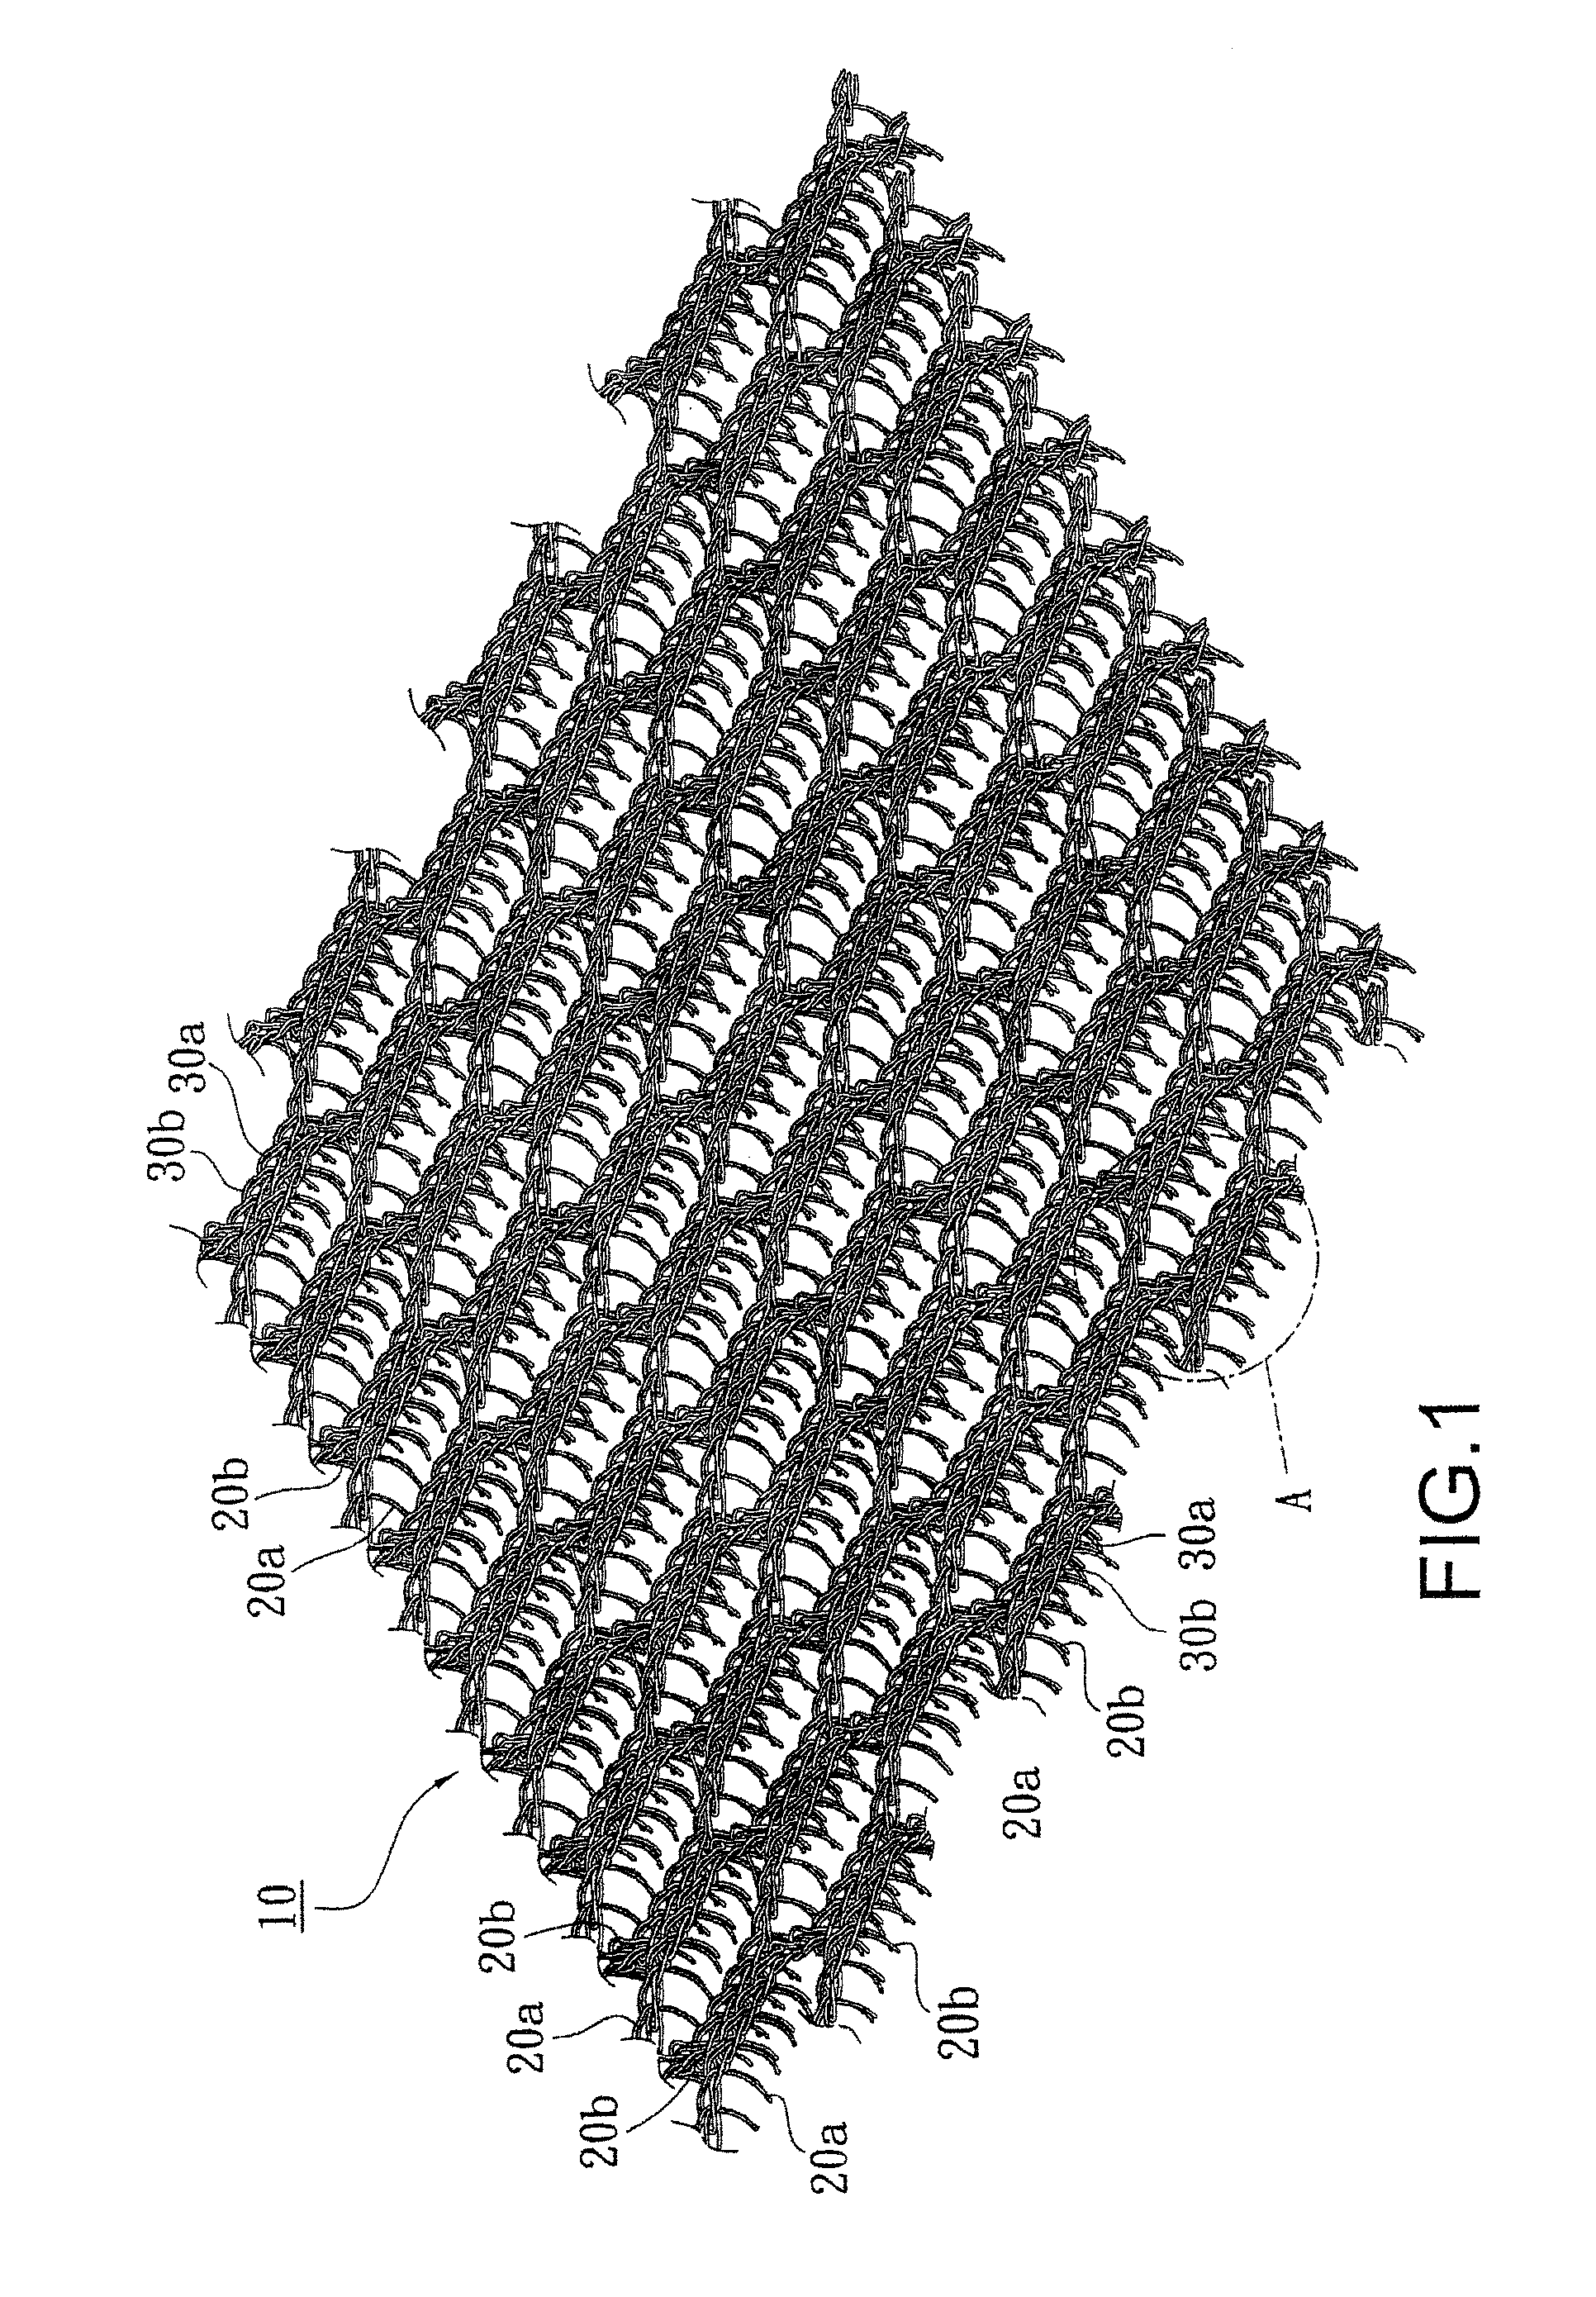 Structure of touch-fastening Anti-skidding material